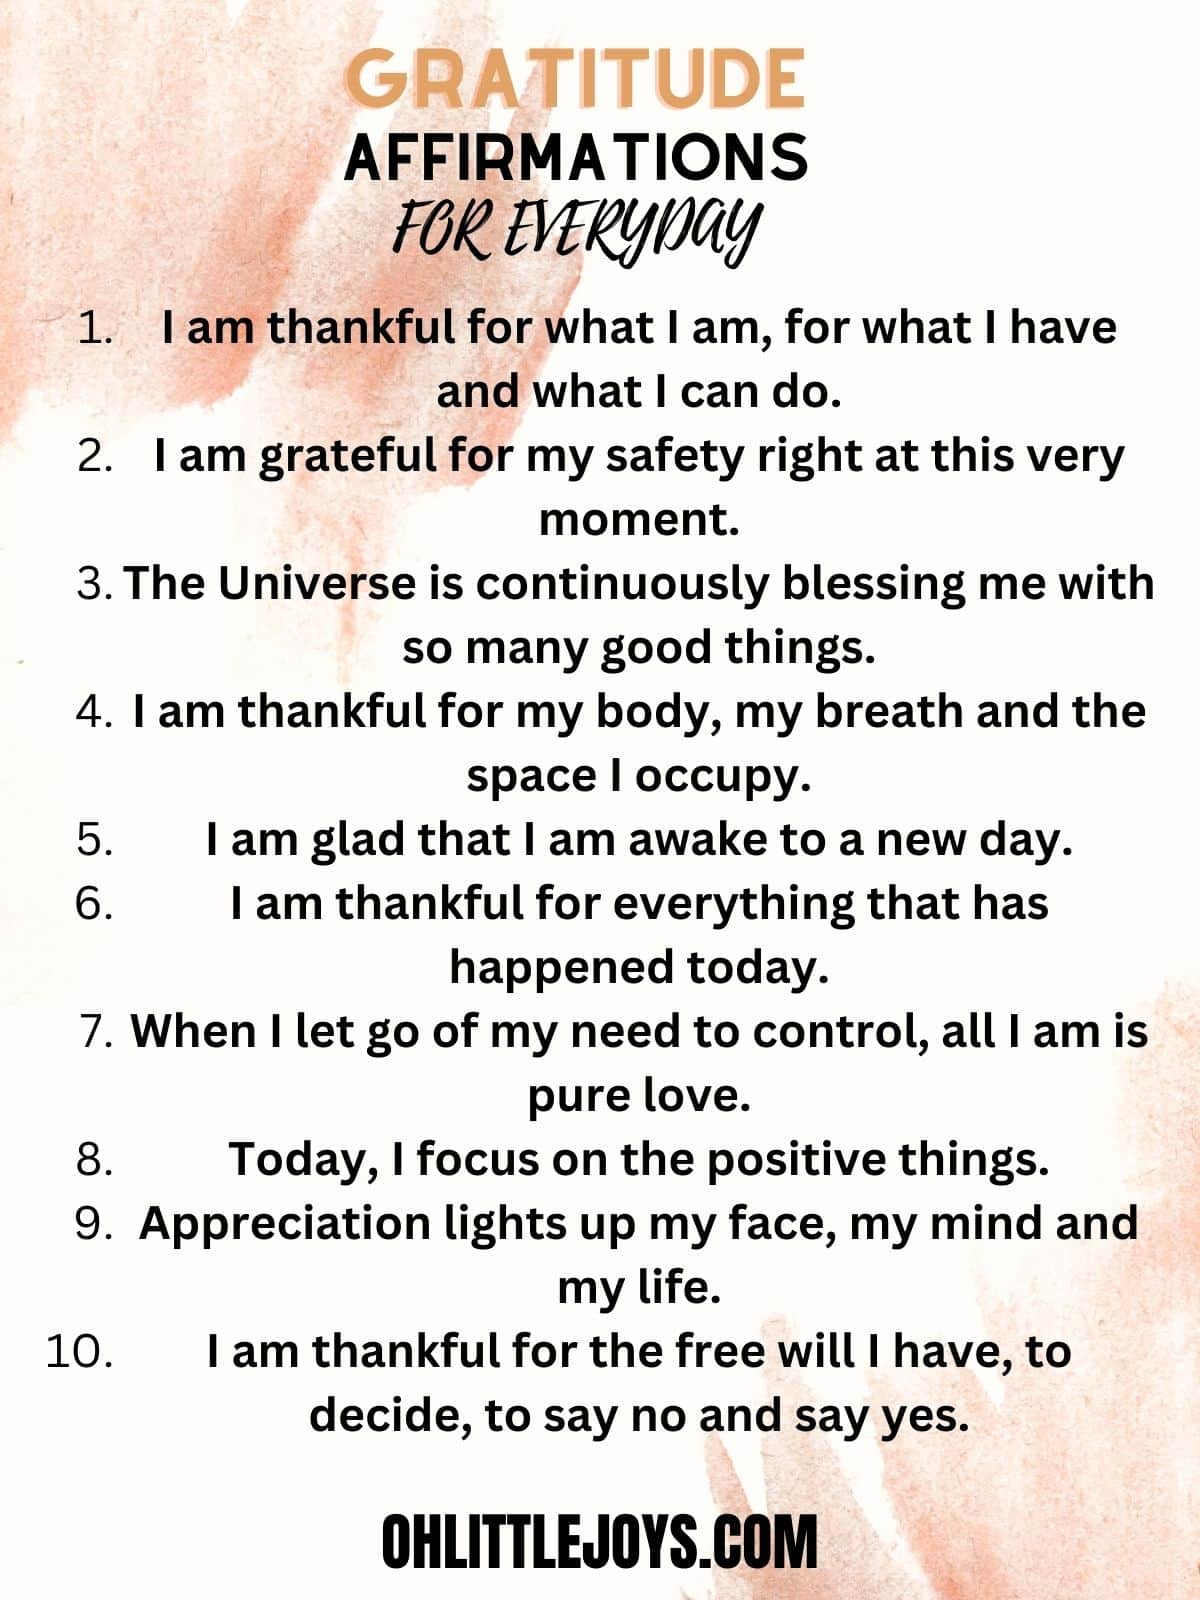 10 Gratitude Affirmations for everyday poster.